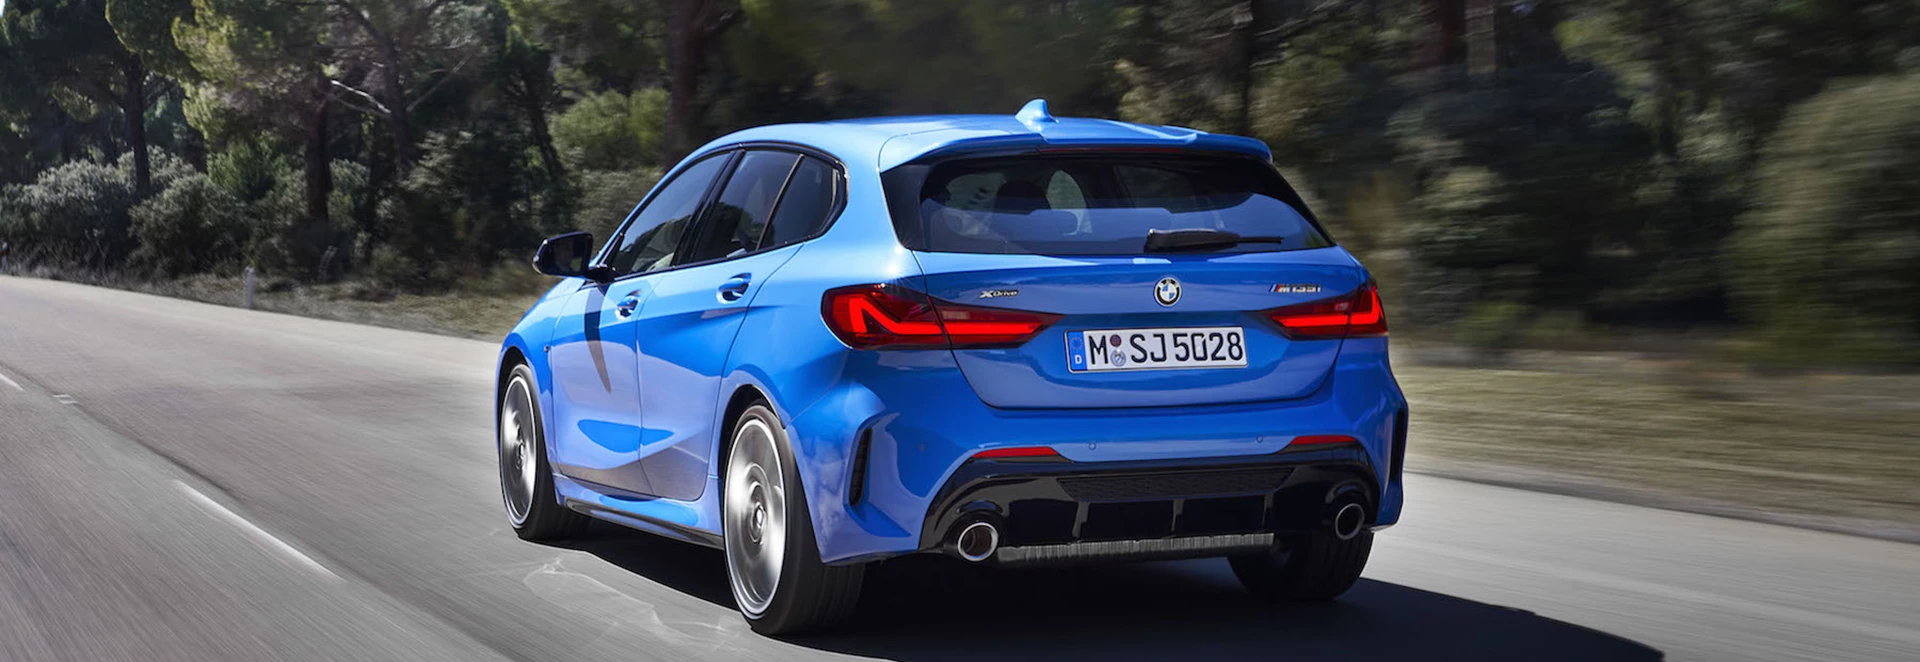 Here’s BMW’s hot new M135i